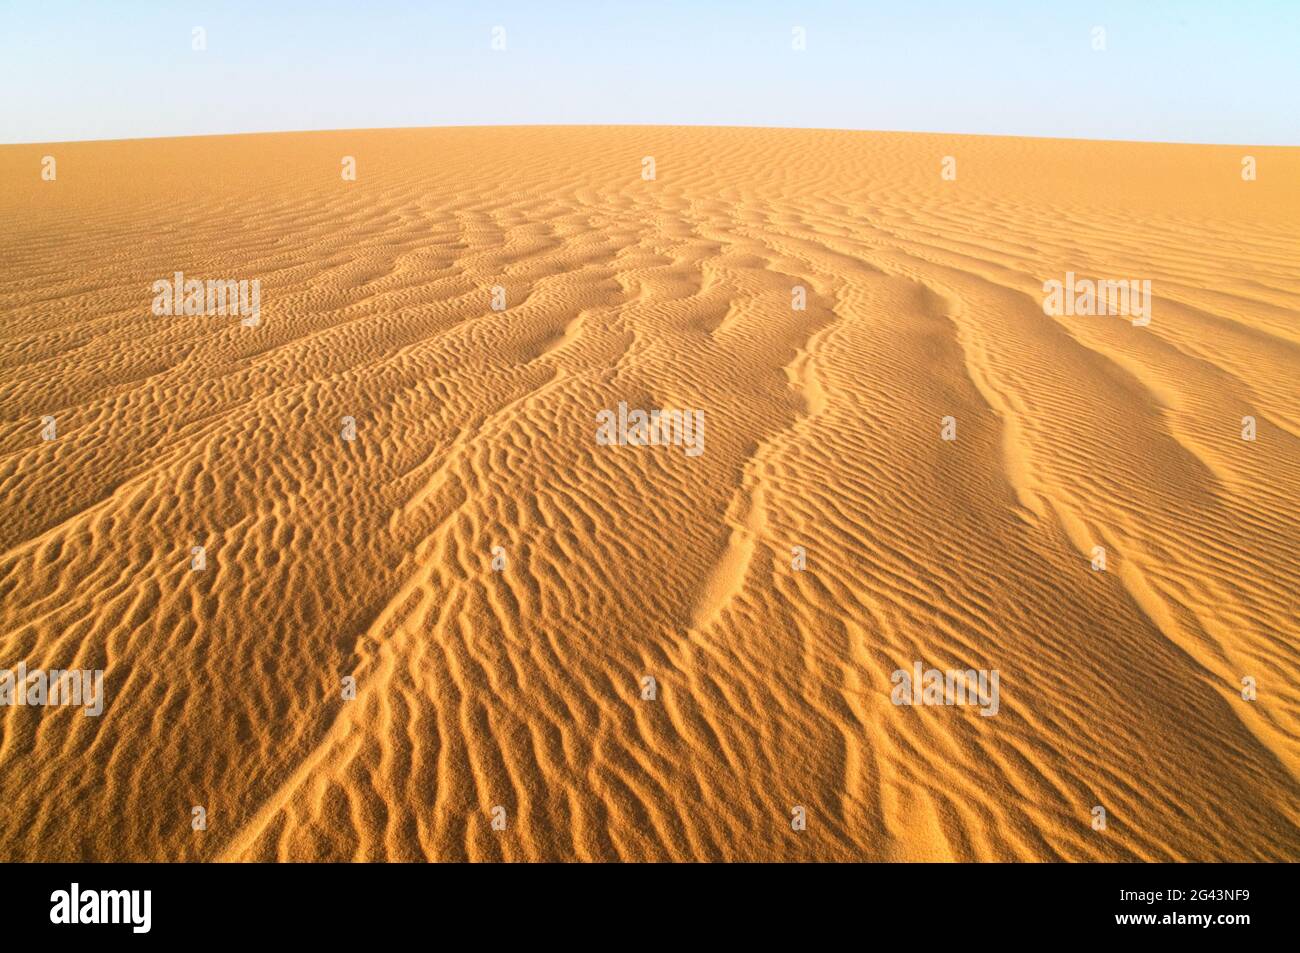 Wind ripples on a large whaleback sand dune on the edge of the Great Sand Sea, in the Western Desert region of the Sahara Desert, Egypt. Stock Photo